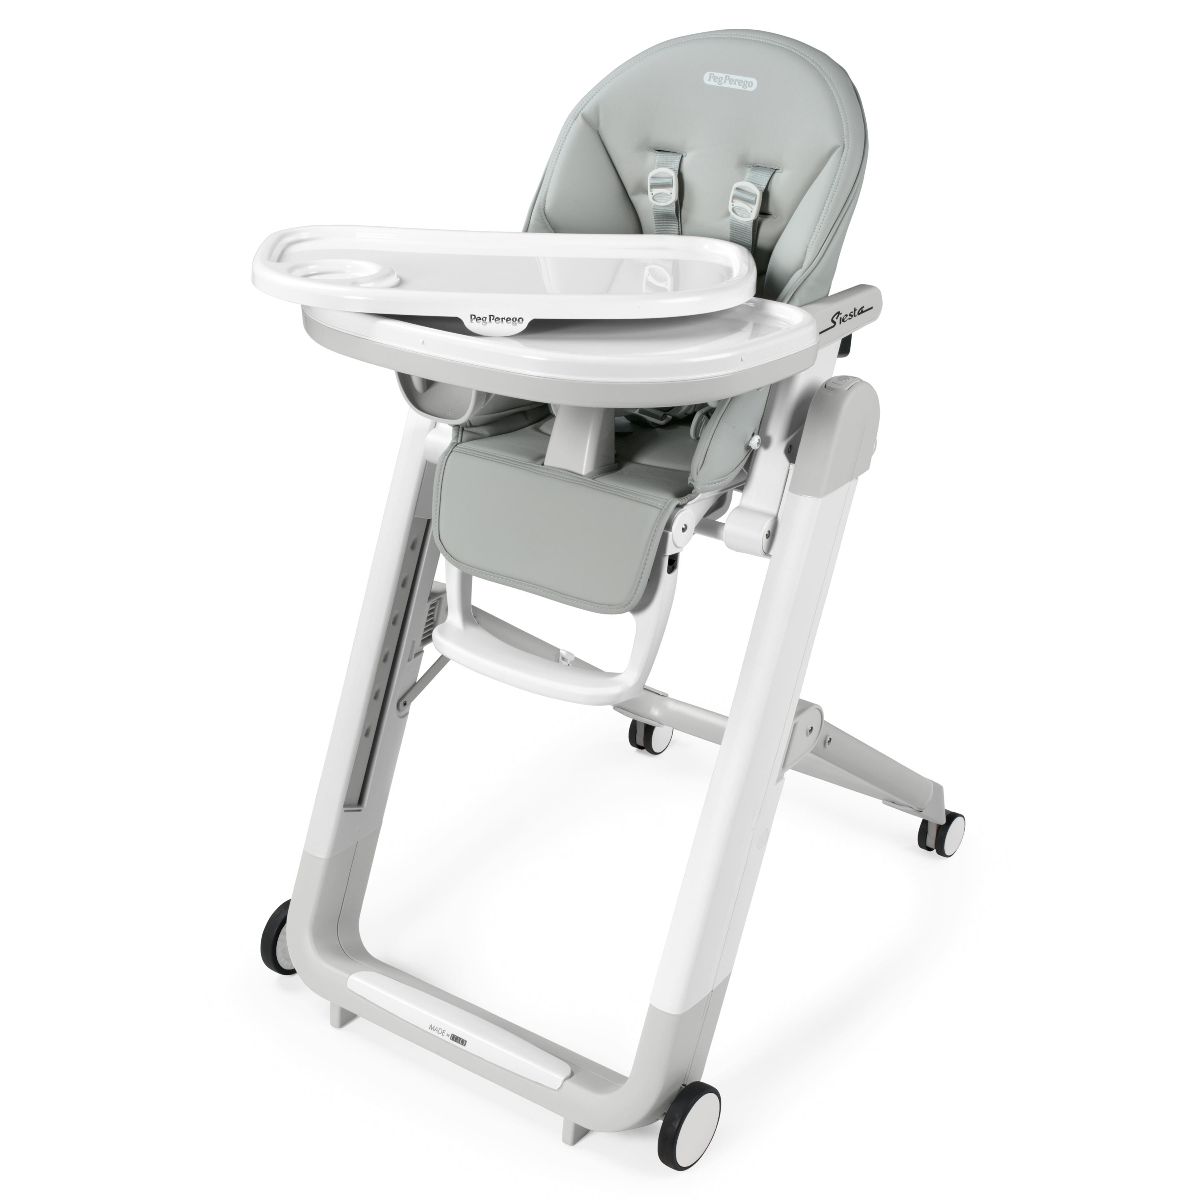 Peg Perego Siesta High Chair - Pure Grey – Our New Baby! Inc